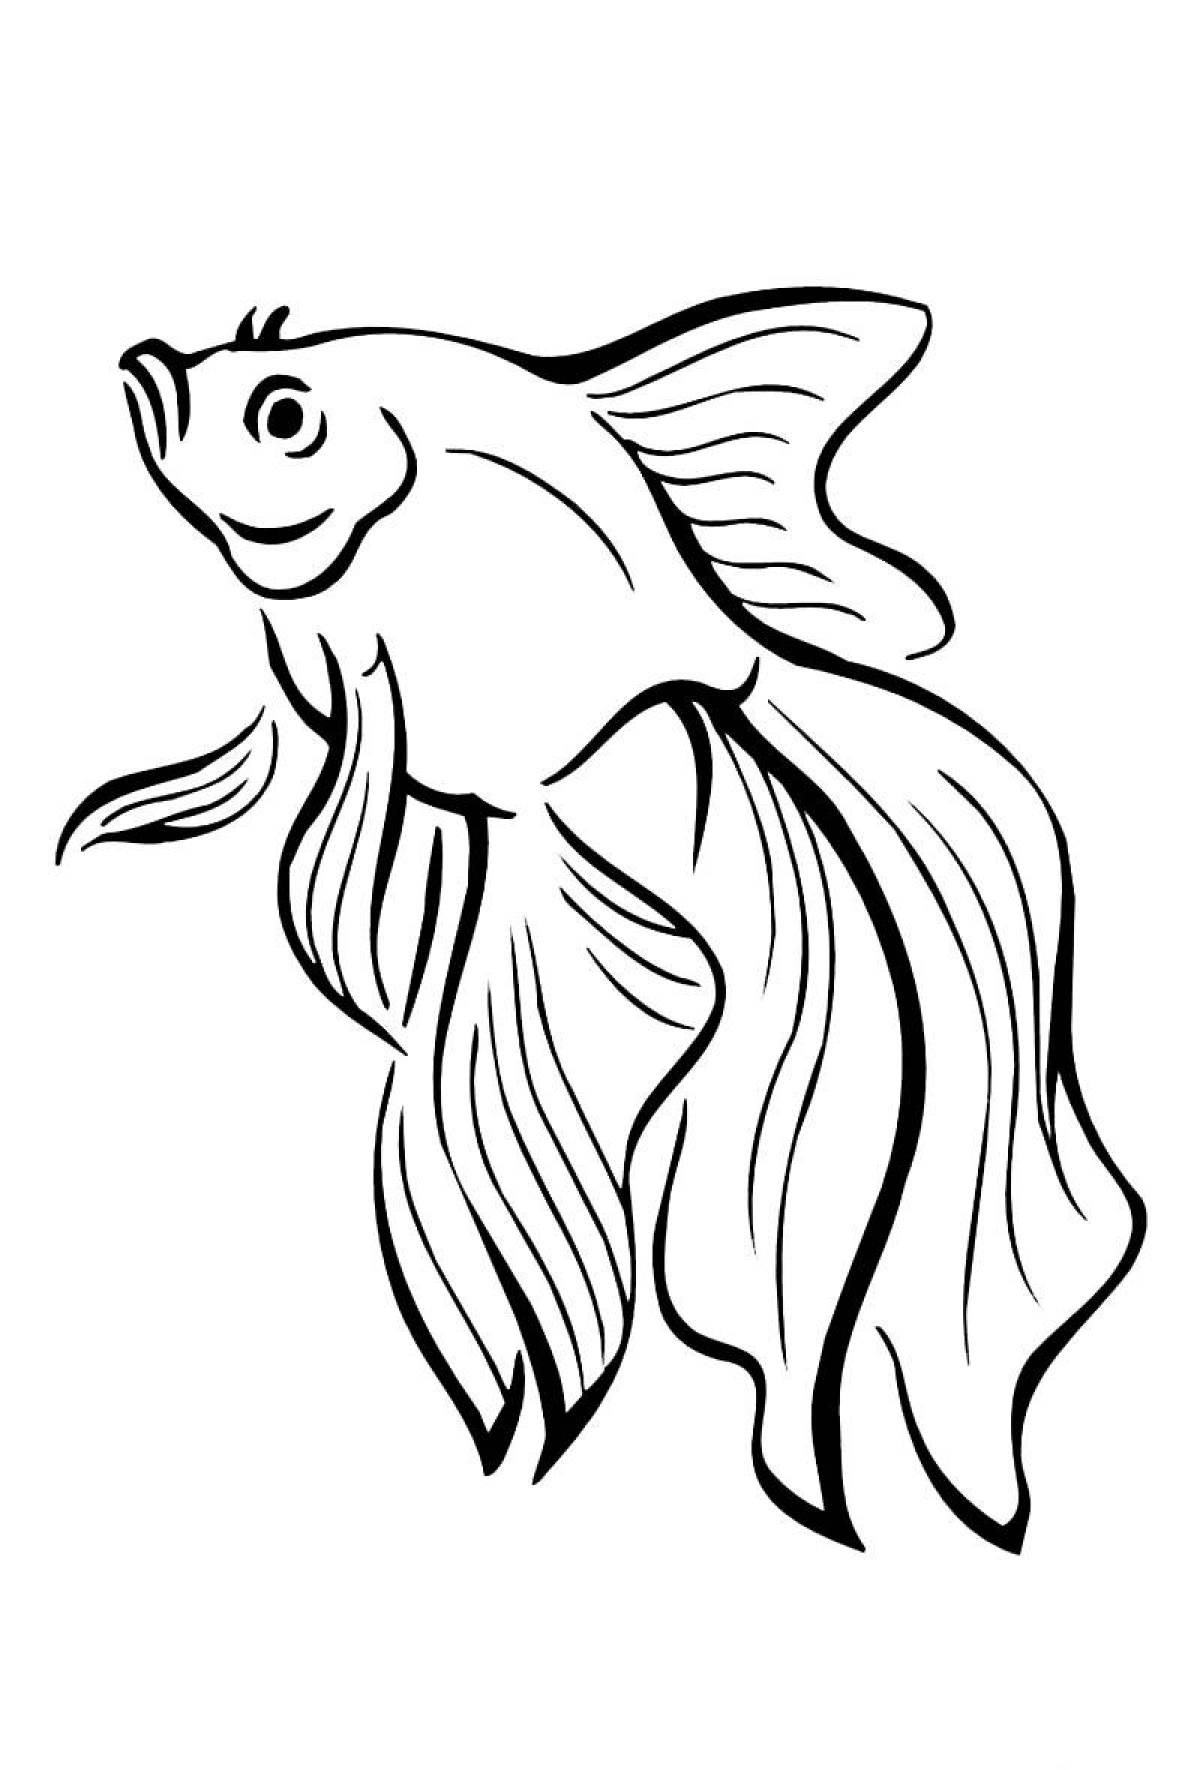 Coloring pages with goldfish for kids